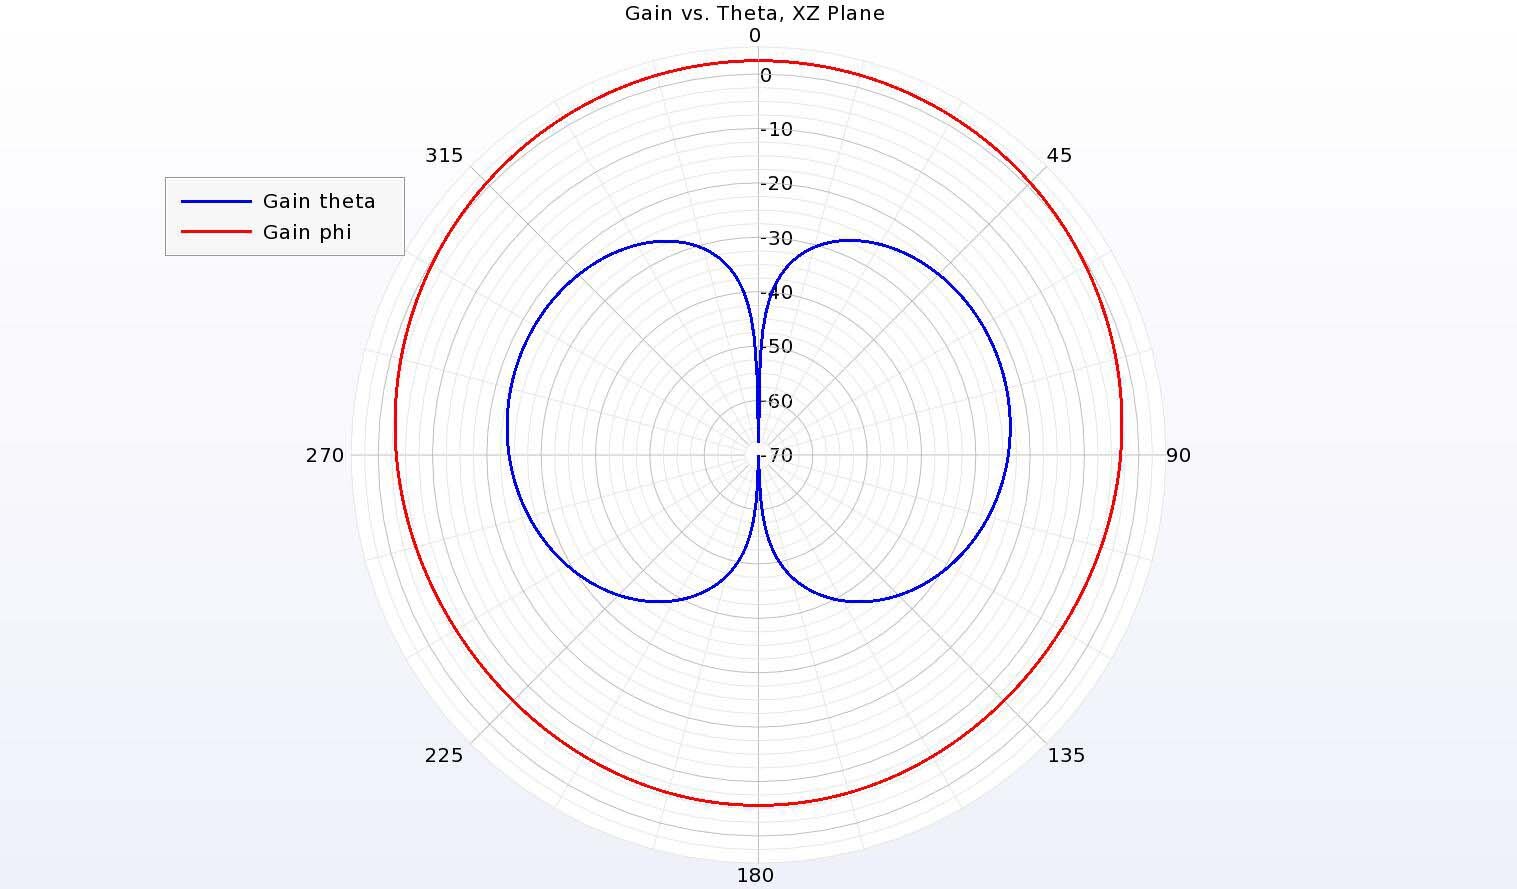 Figure 9:  In the XZ plane (vertical cut) of the antenna pattern, the co-polarized gain is nearly 30 dB higher than the cross-polarized gain, providing excellent isolation.